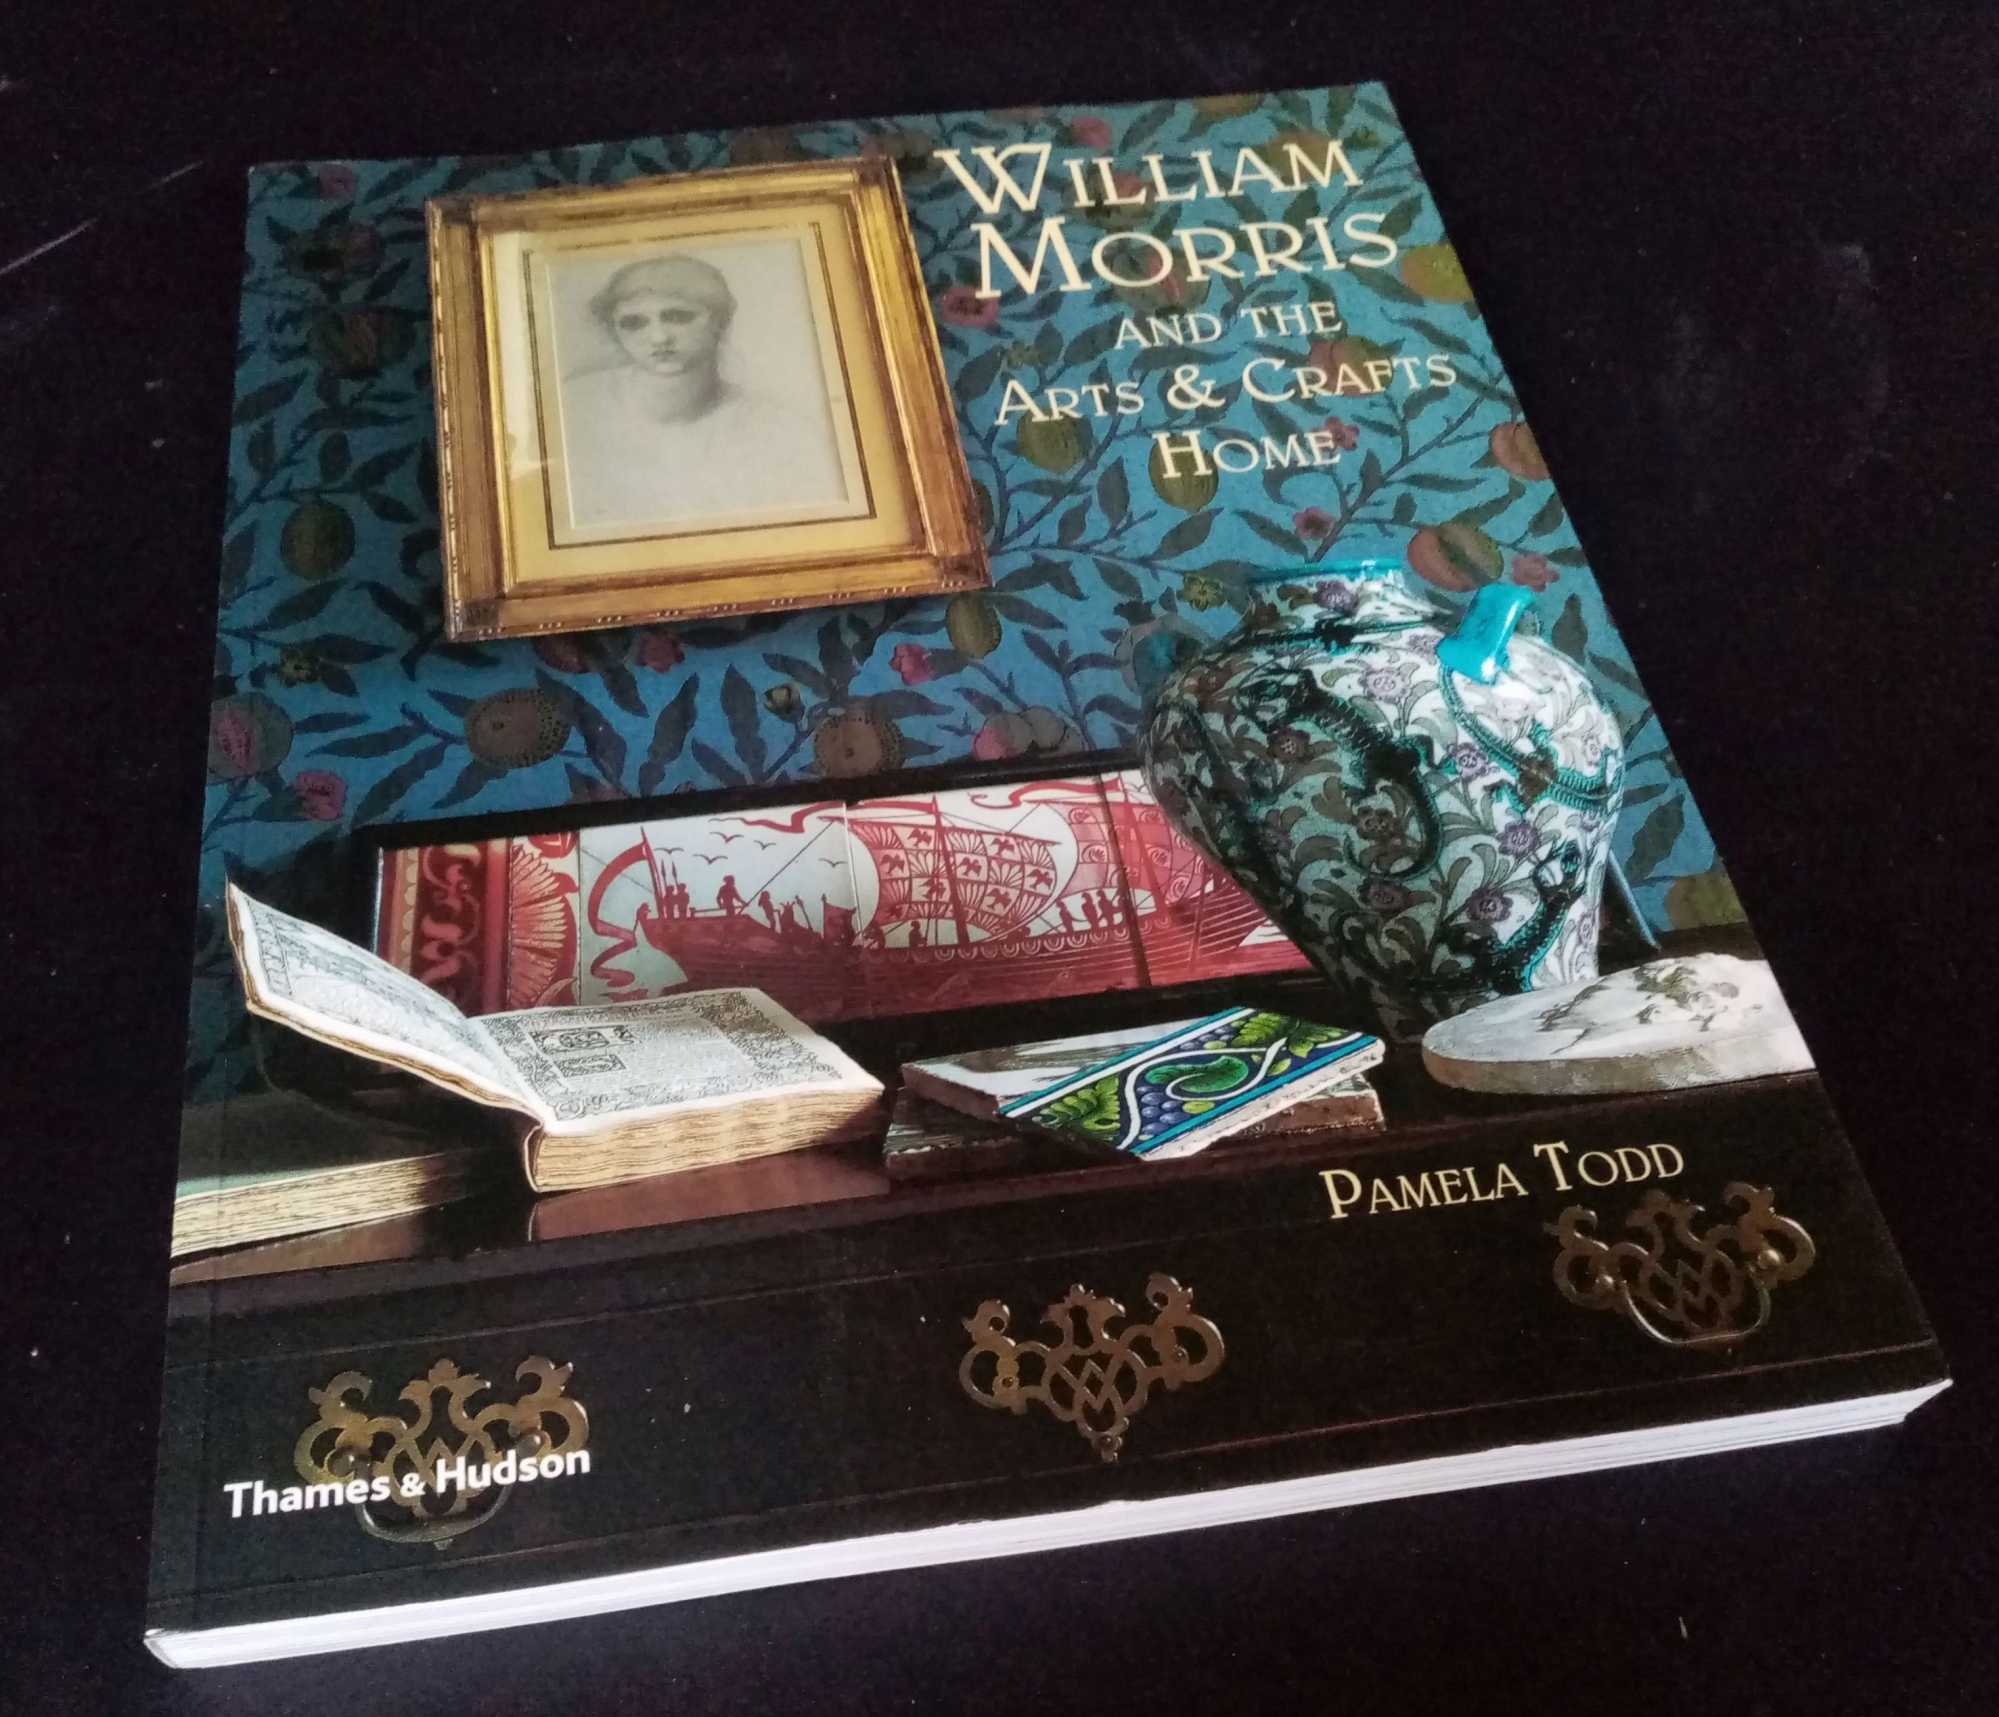 Pamela Todd - William Morris and the Arts & Crafts Home